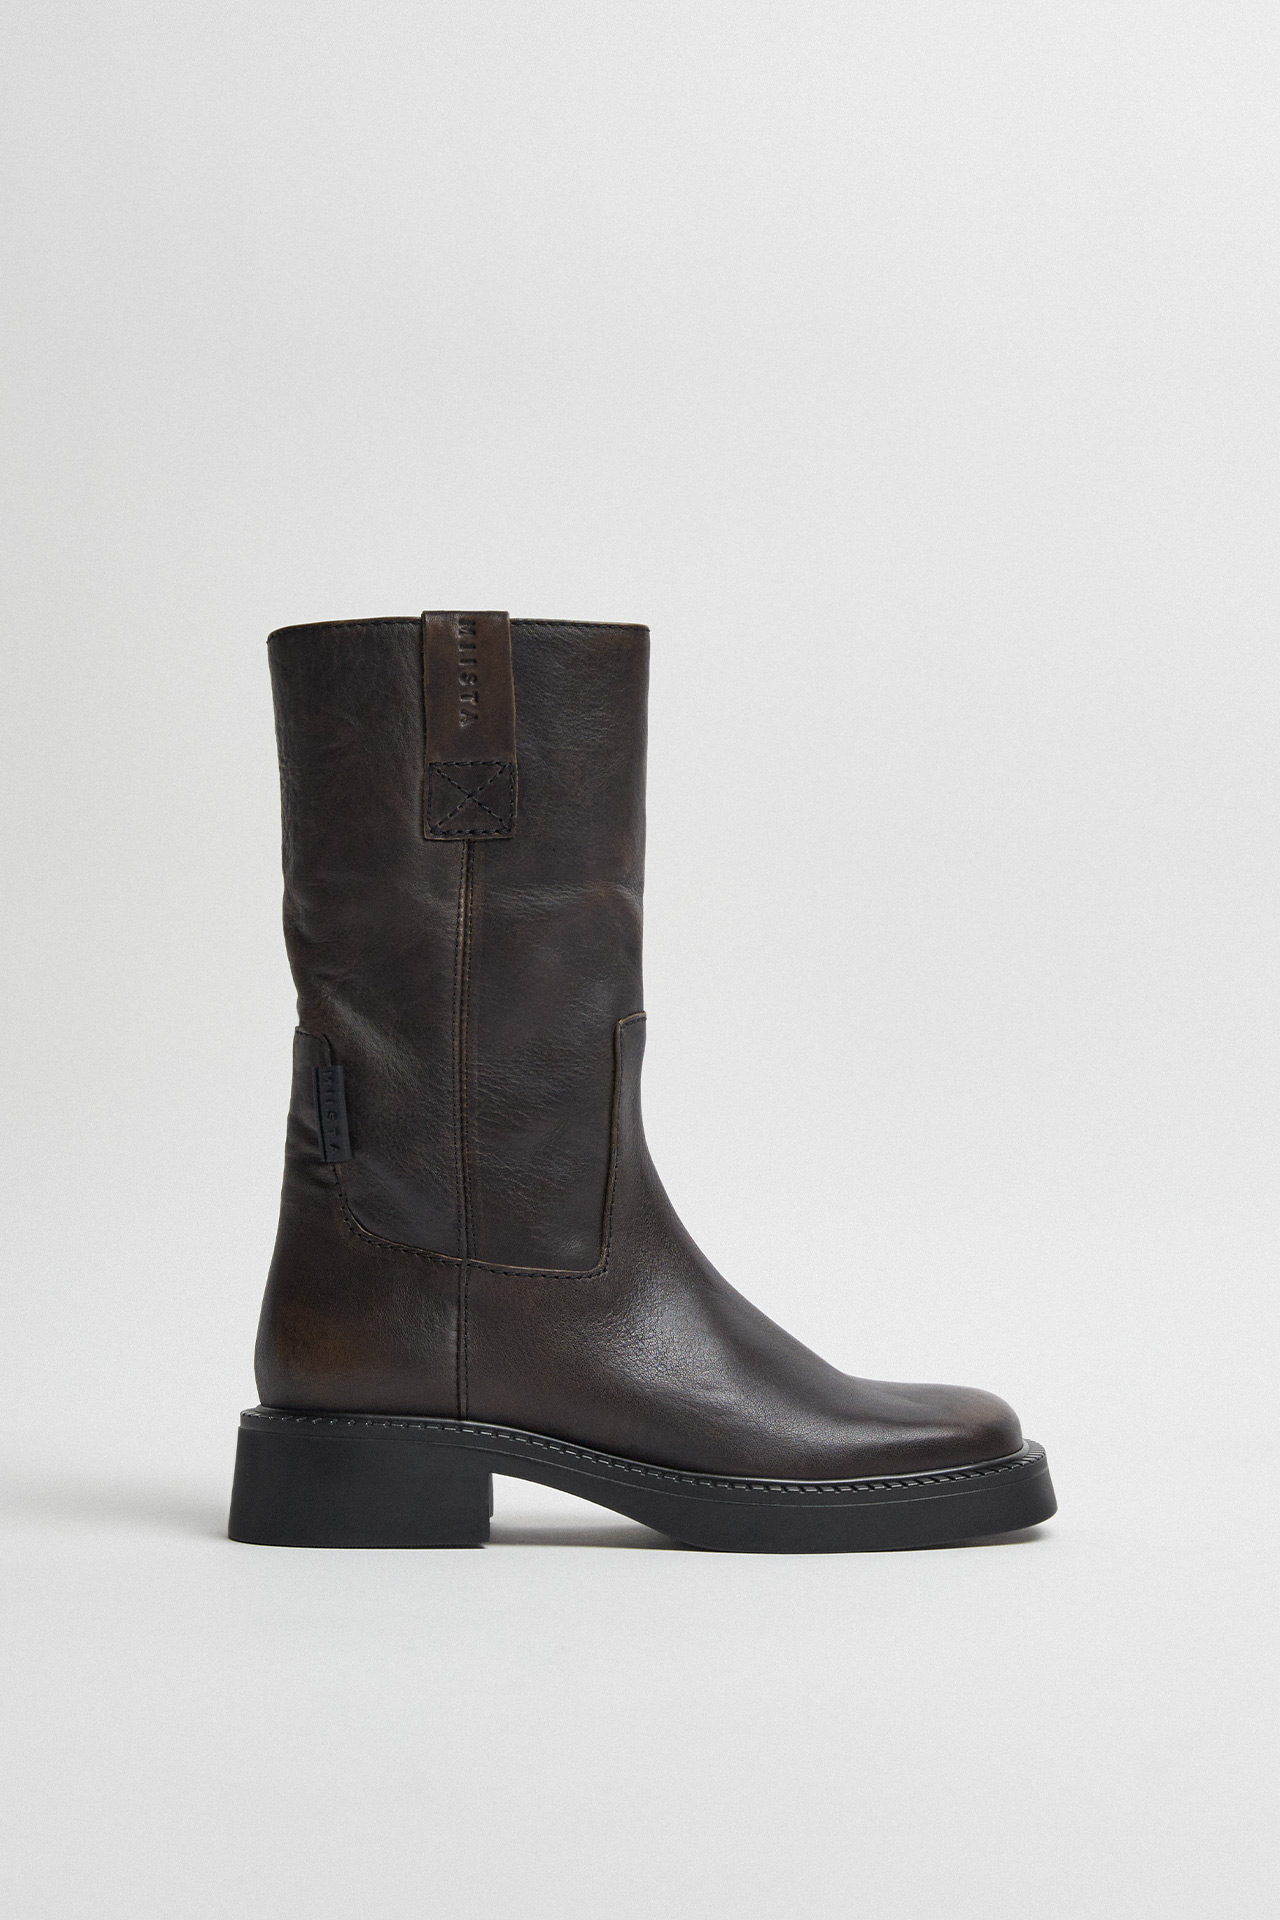 Aron Brown Boots | Miista Europe | Made in Portugal